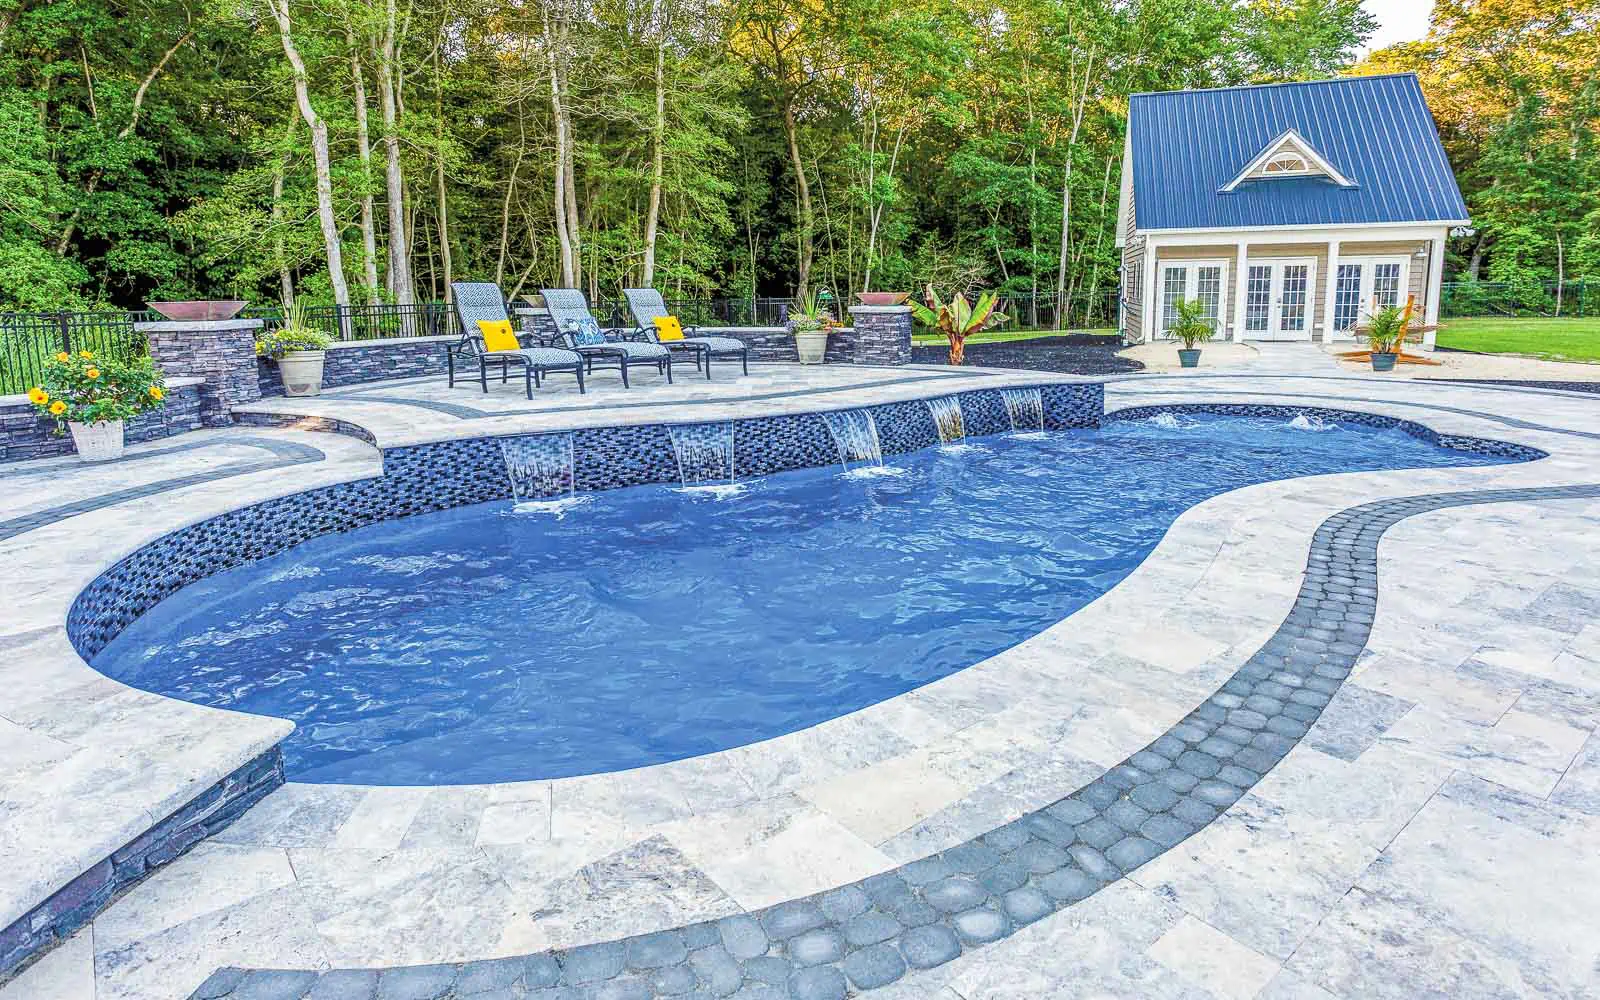 The Eclipse, a fiberglass pool design manufactured by Leisure Pools